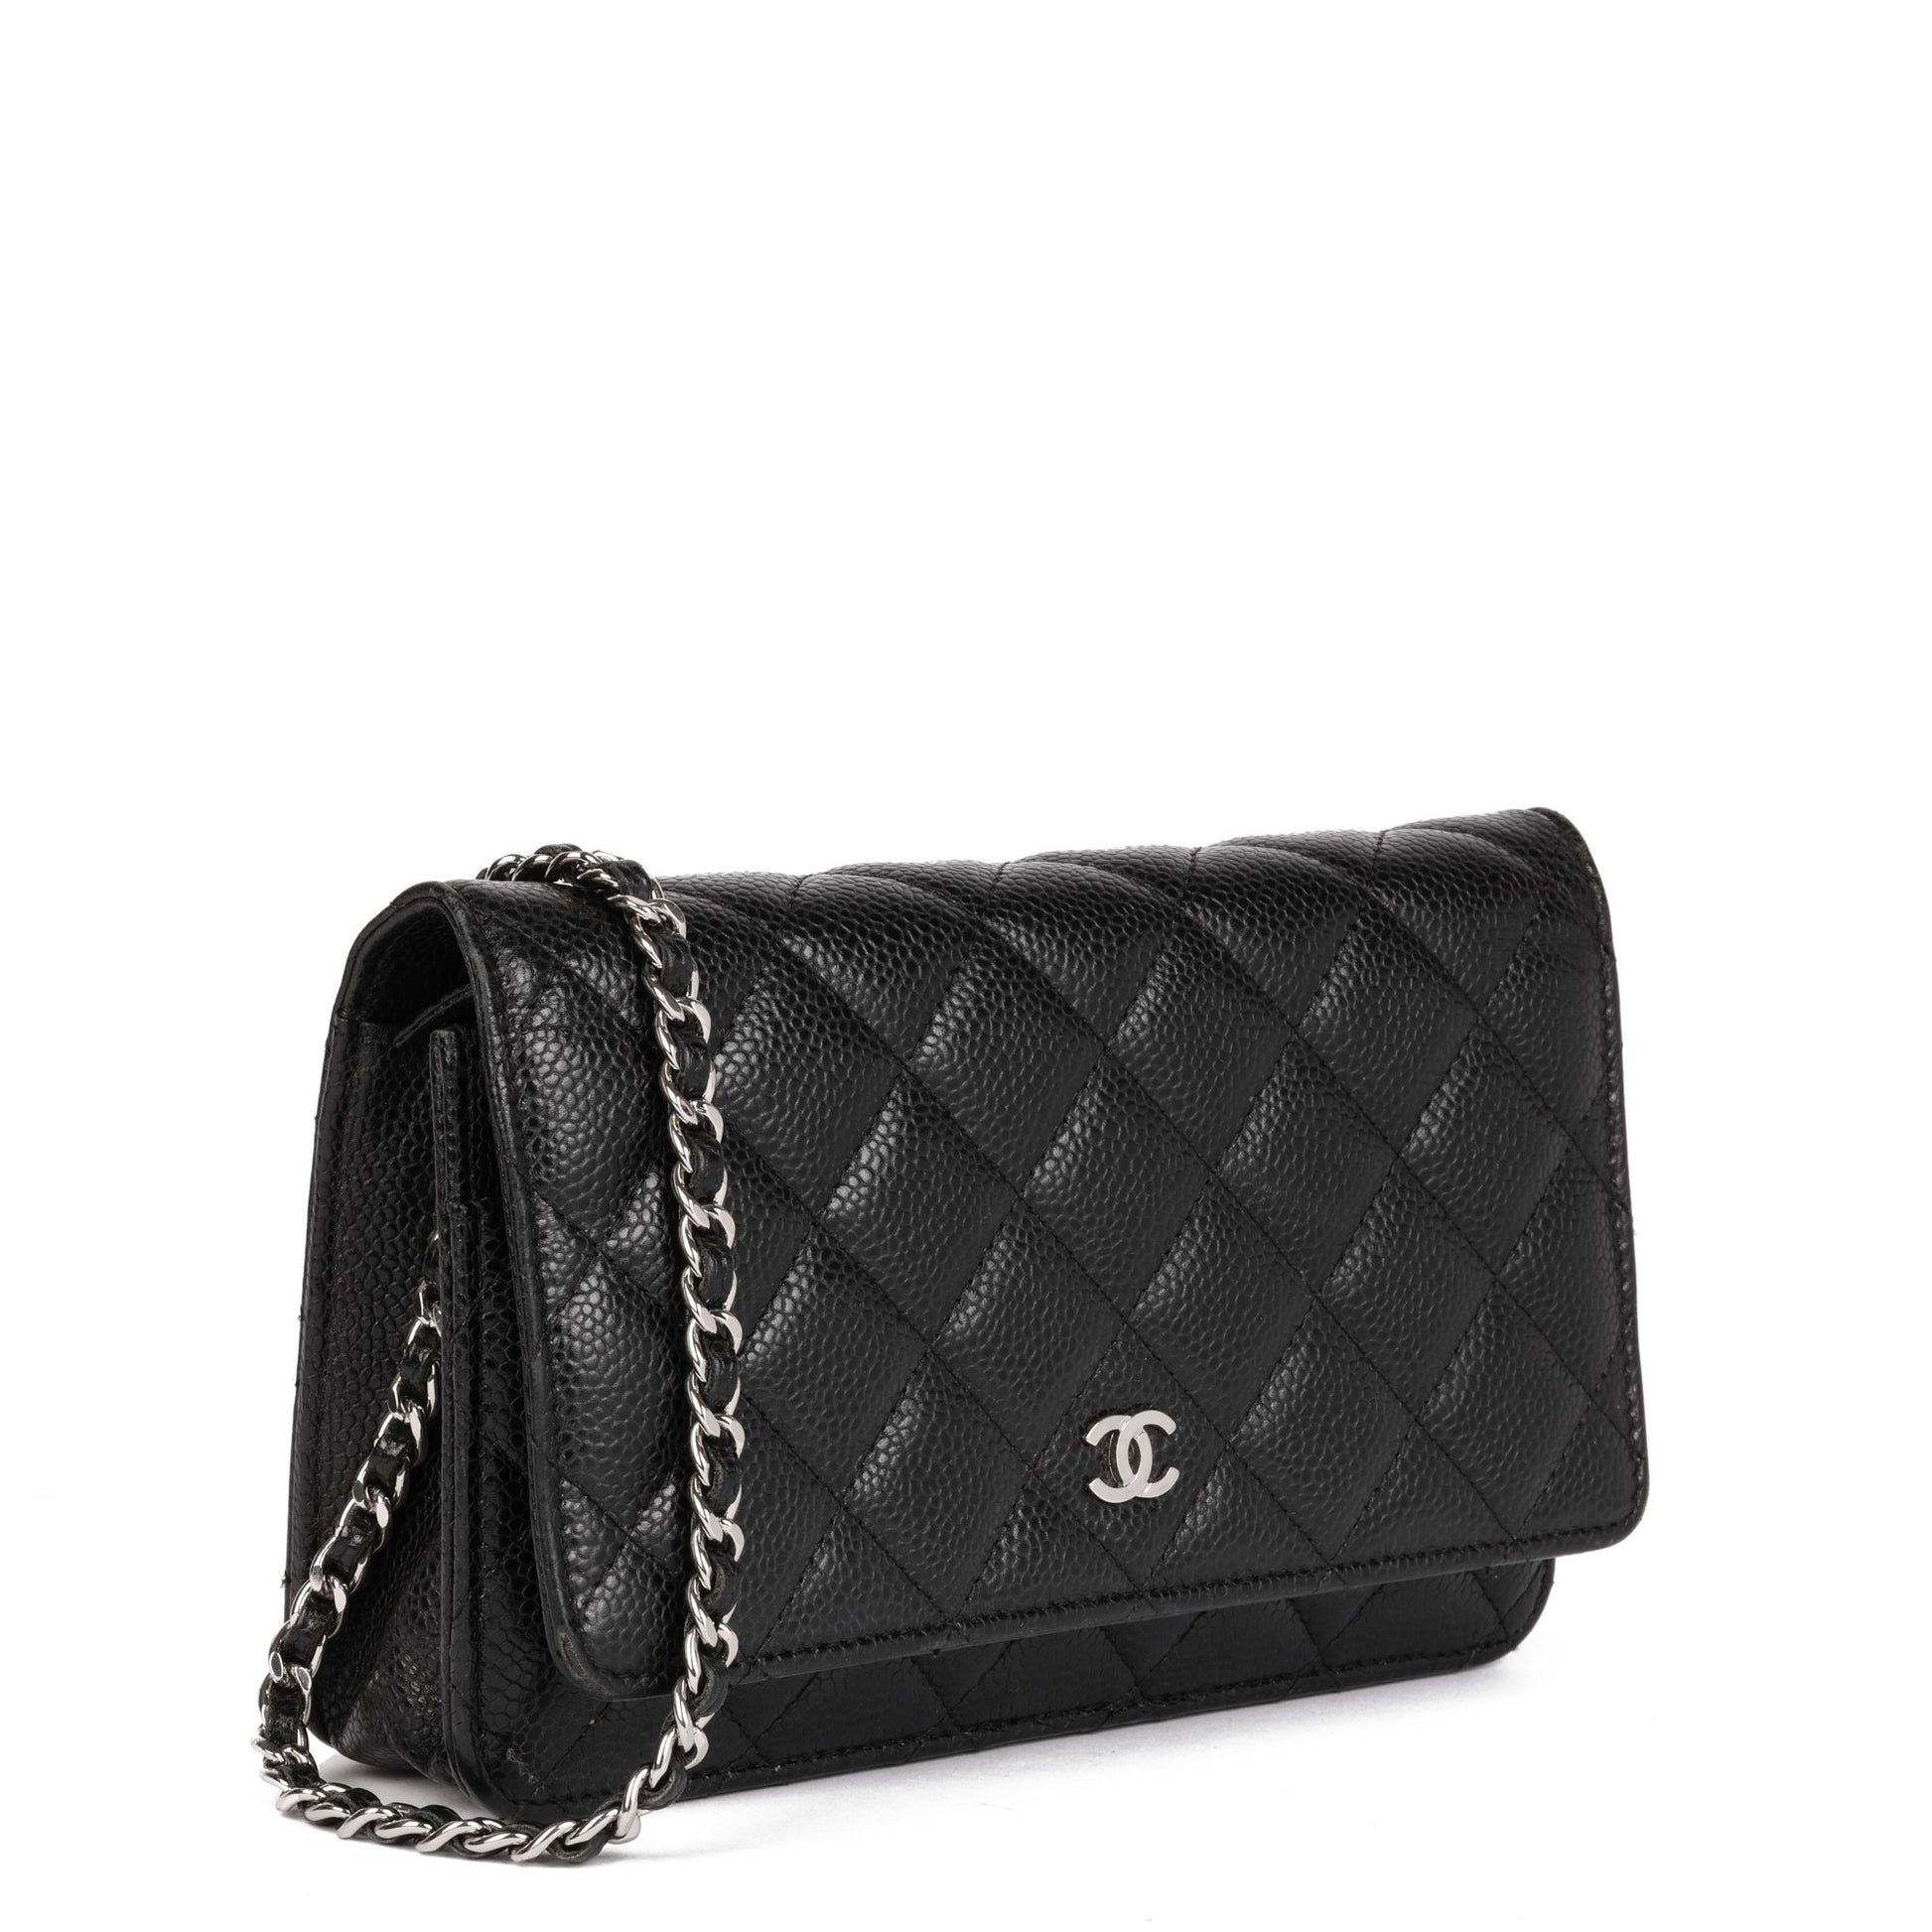 Chanel Black Quilted Caviar Leather Wallet-on-Chain WOC Shoulder Bag